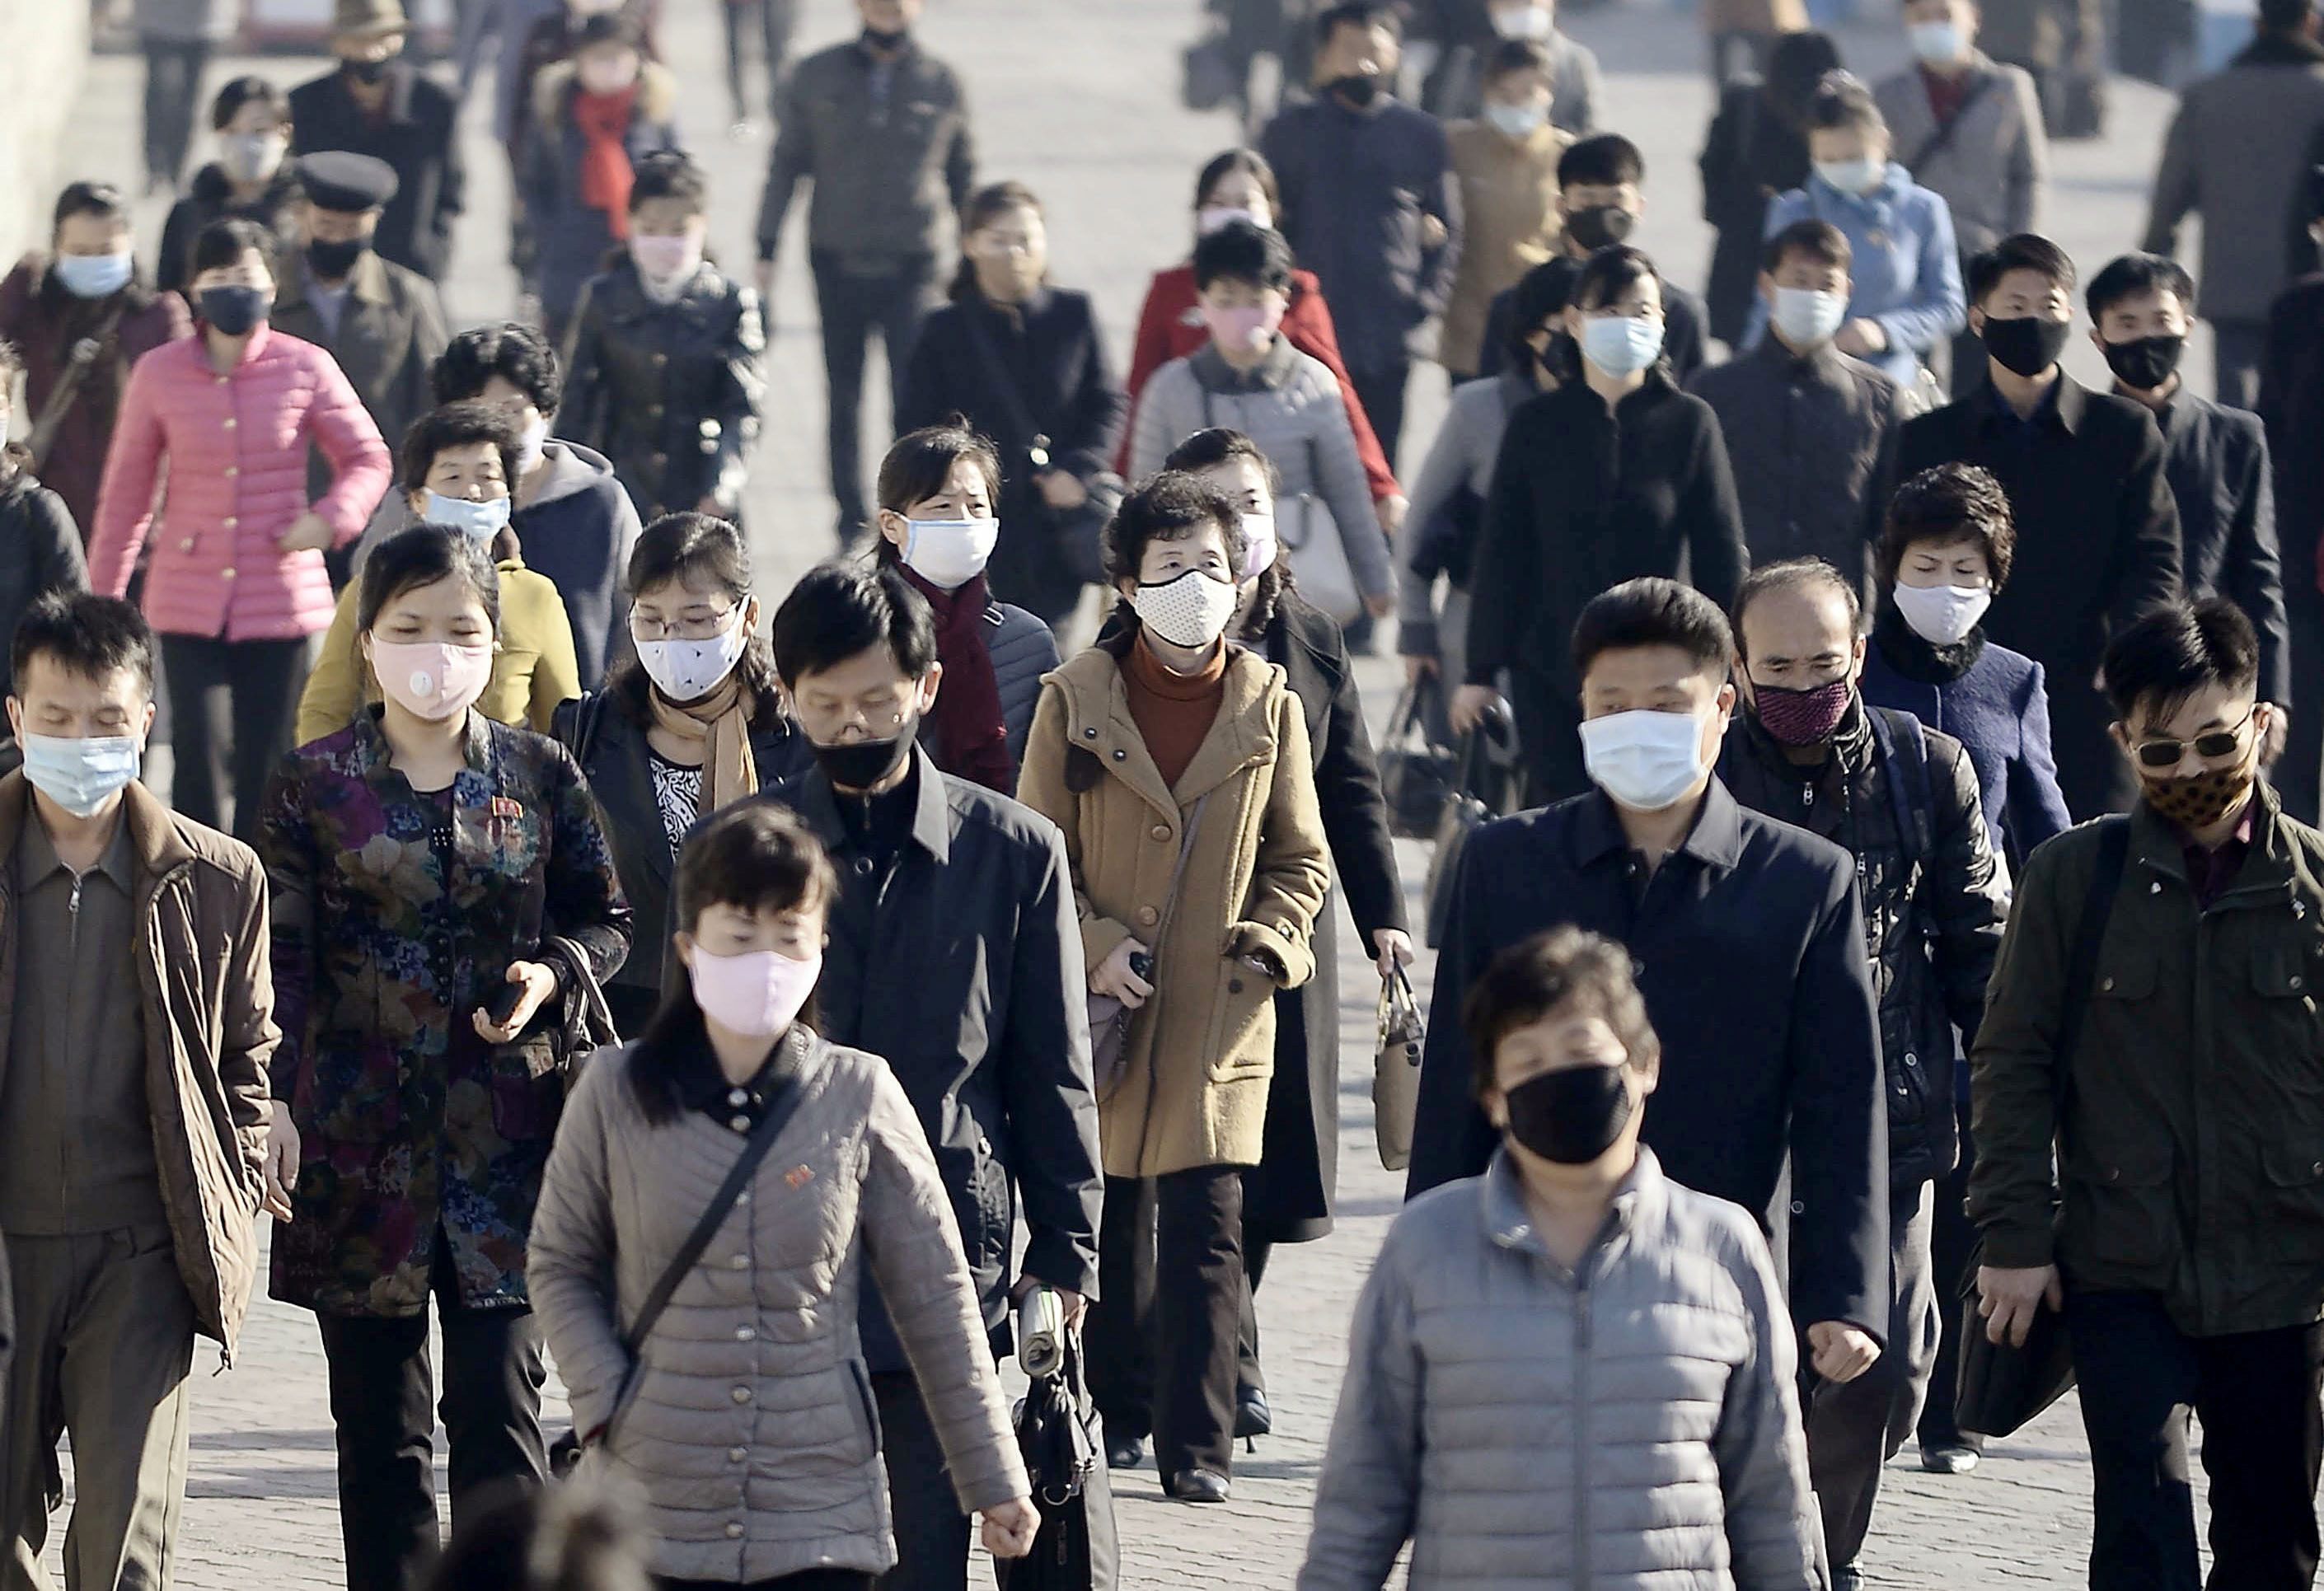 People wearing protective face masks commute amid concerns over the new coronavirus disease in Pyongyang, North Korea